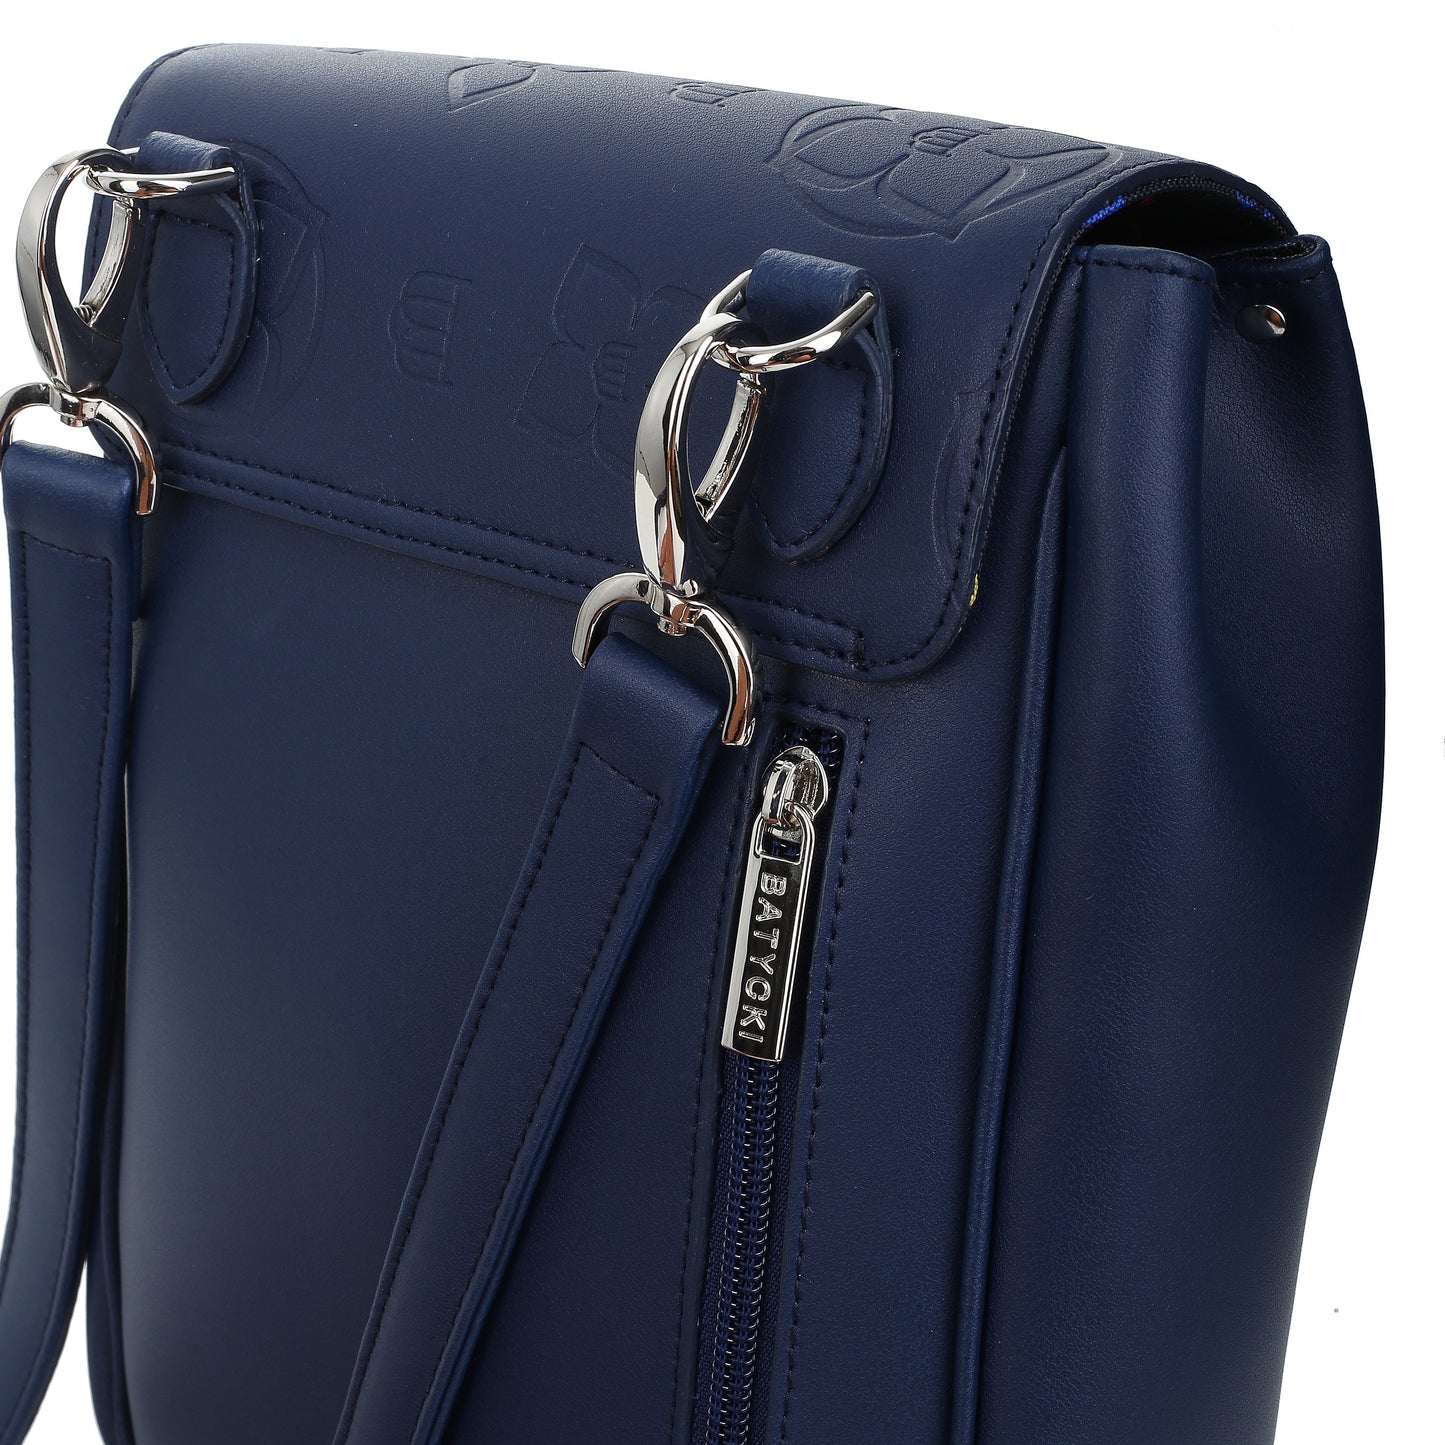 VICTORIA NAPA NAVY women's leather backpack